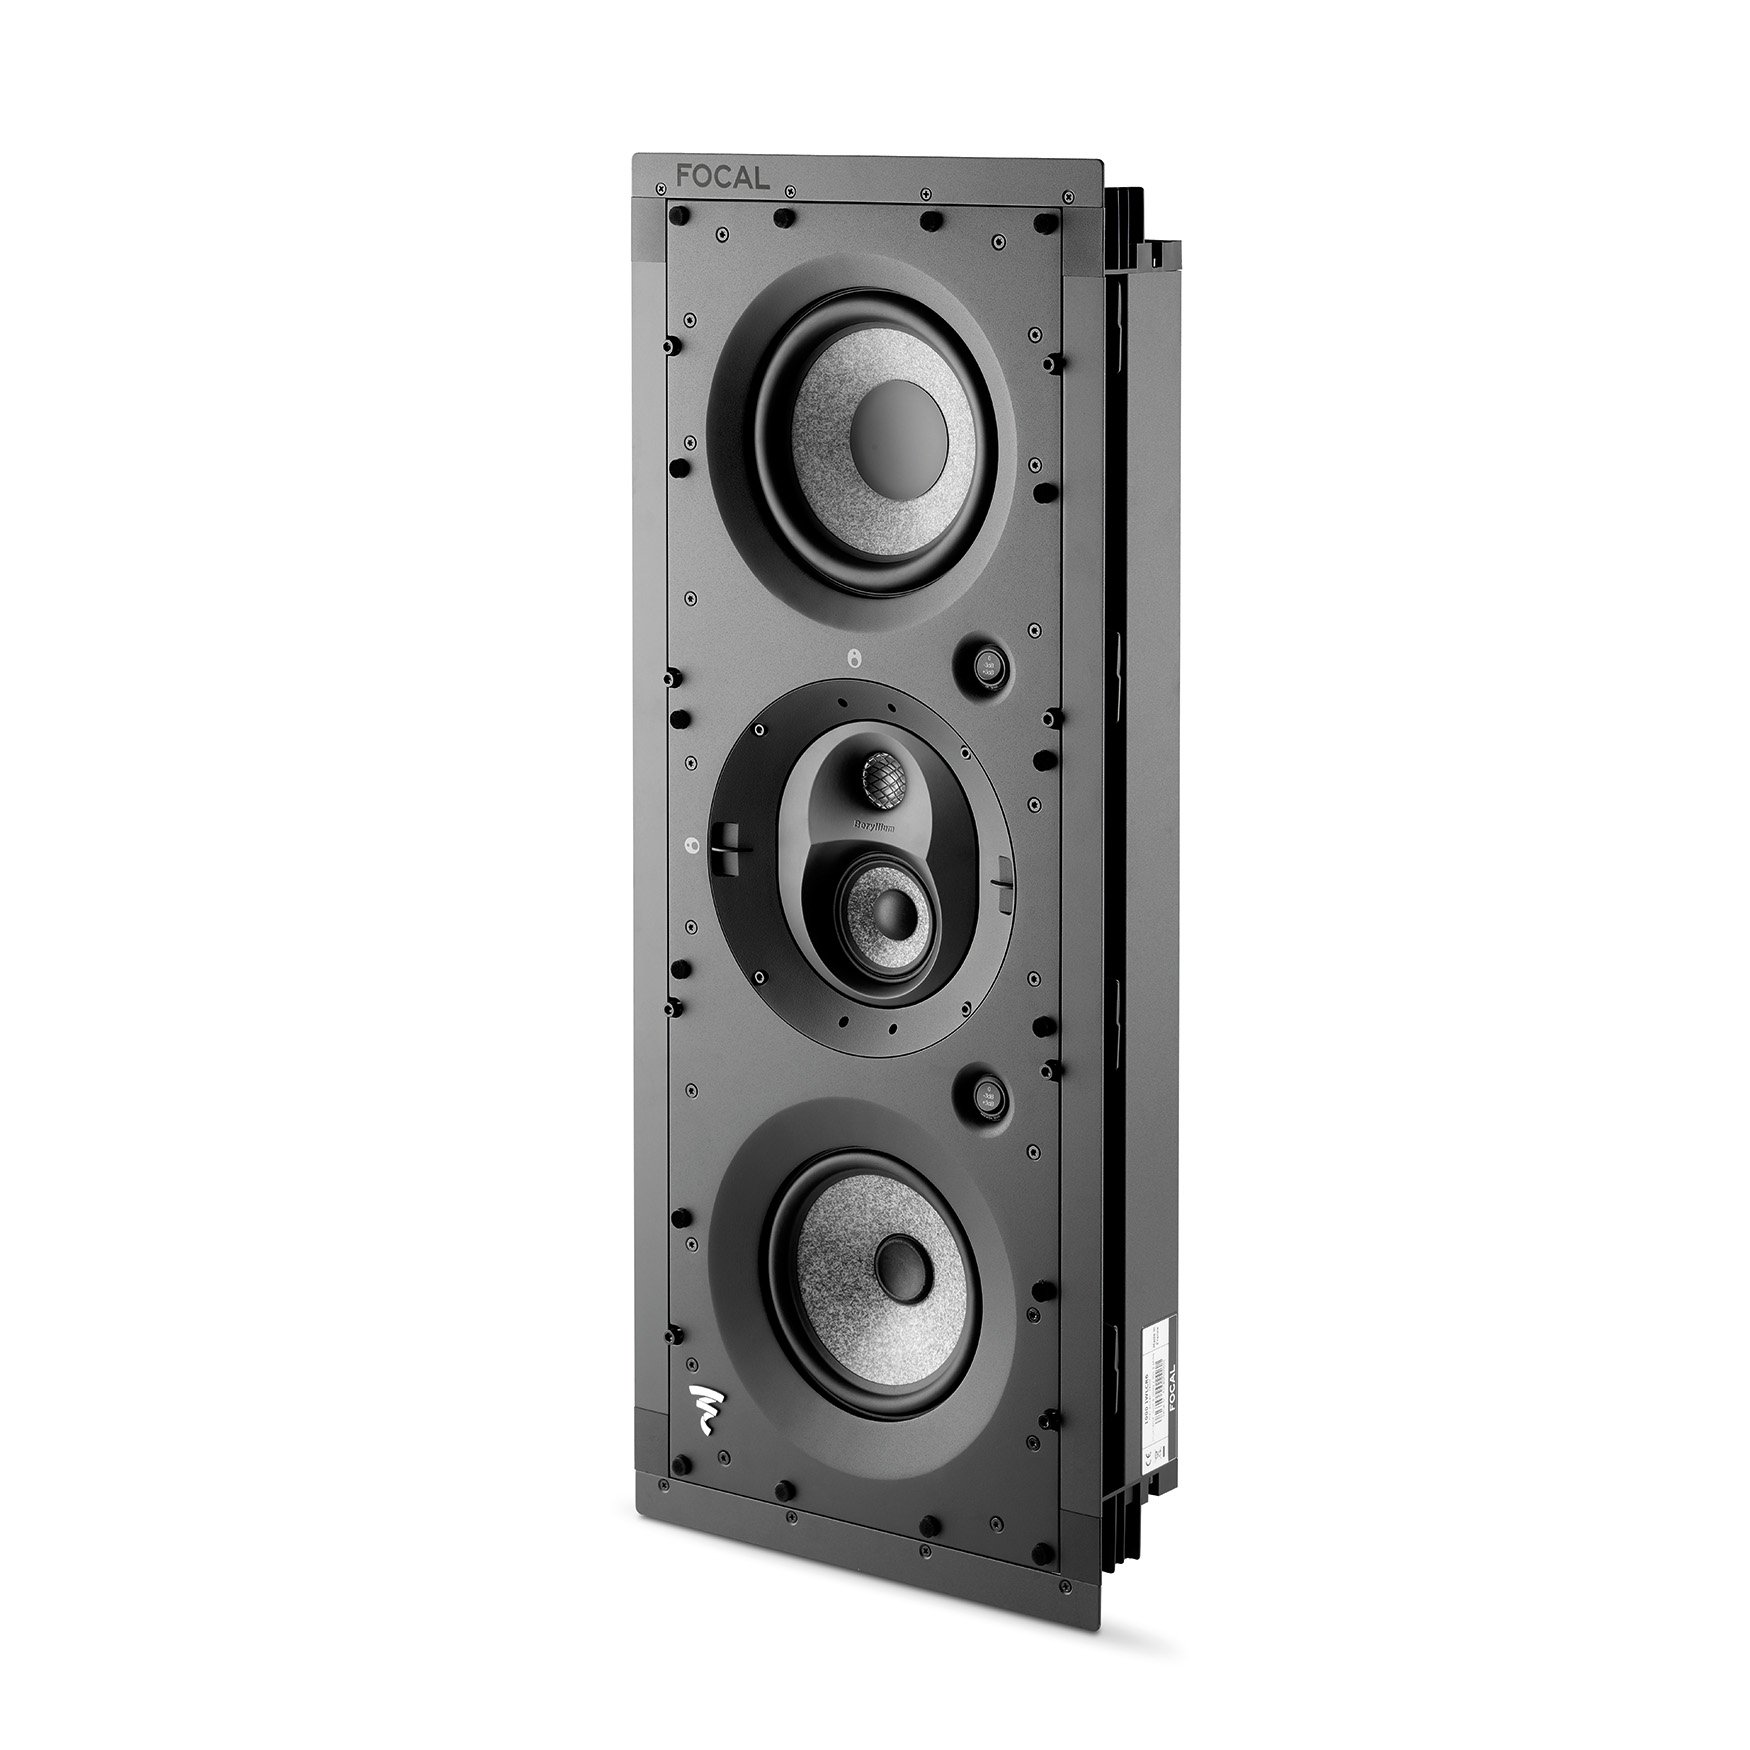 Focal 1000 IWLCR6 high-end in-wall LCR speaker in Winnipeg at Creative Audio (side view)